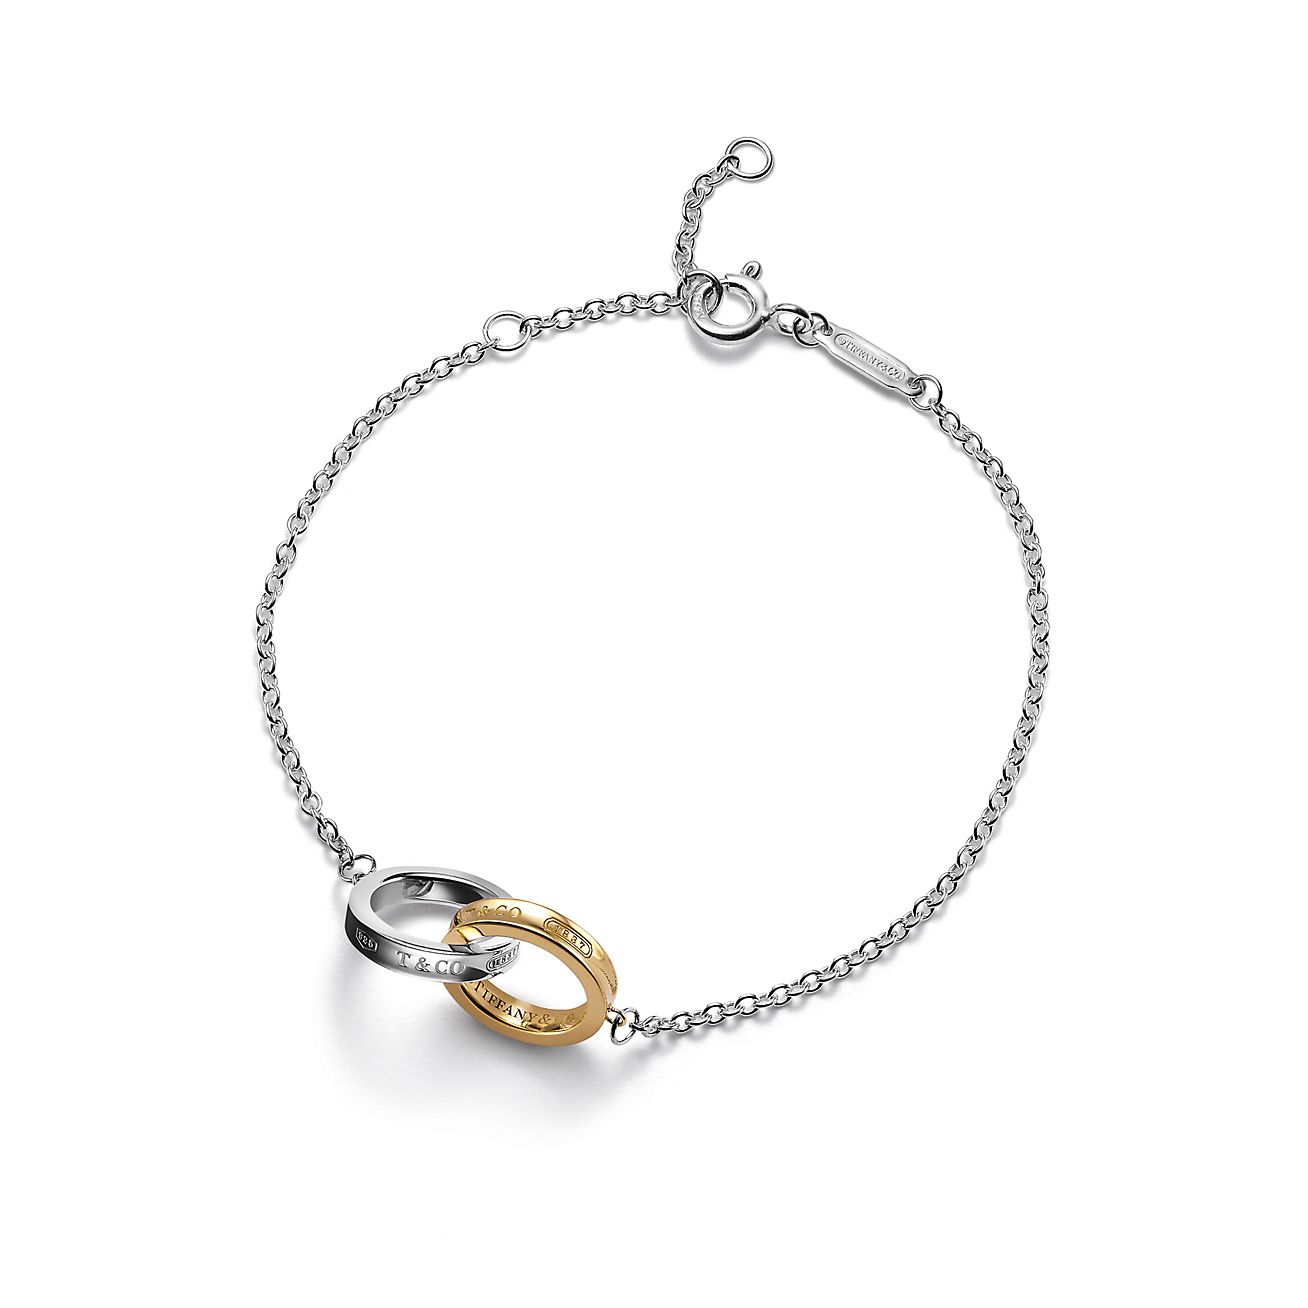 Tiffany 1837®Interlocking Circles Chain Bracelet in Sterling Silver and Yellow Gold